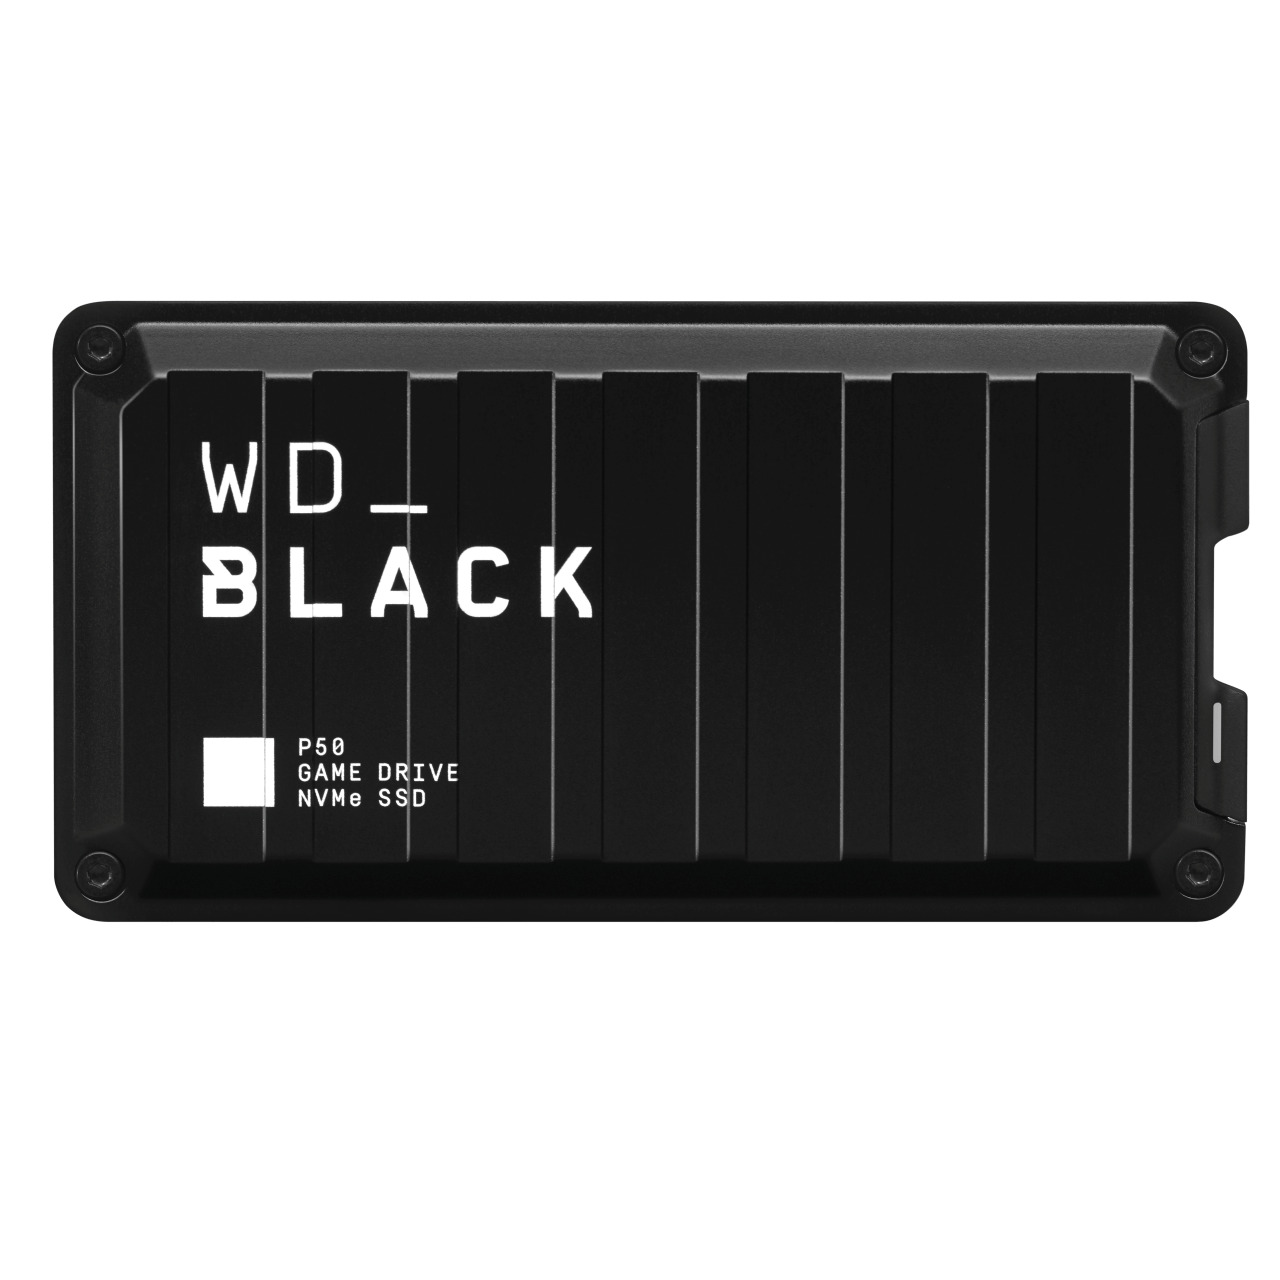 WD_BLACK 2TB P50 Game Drive SSD, External Solid State Drive - WDBA3S0020BBK-WESN